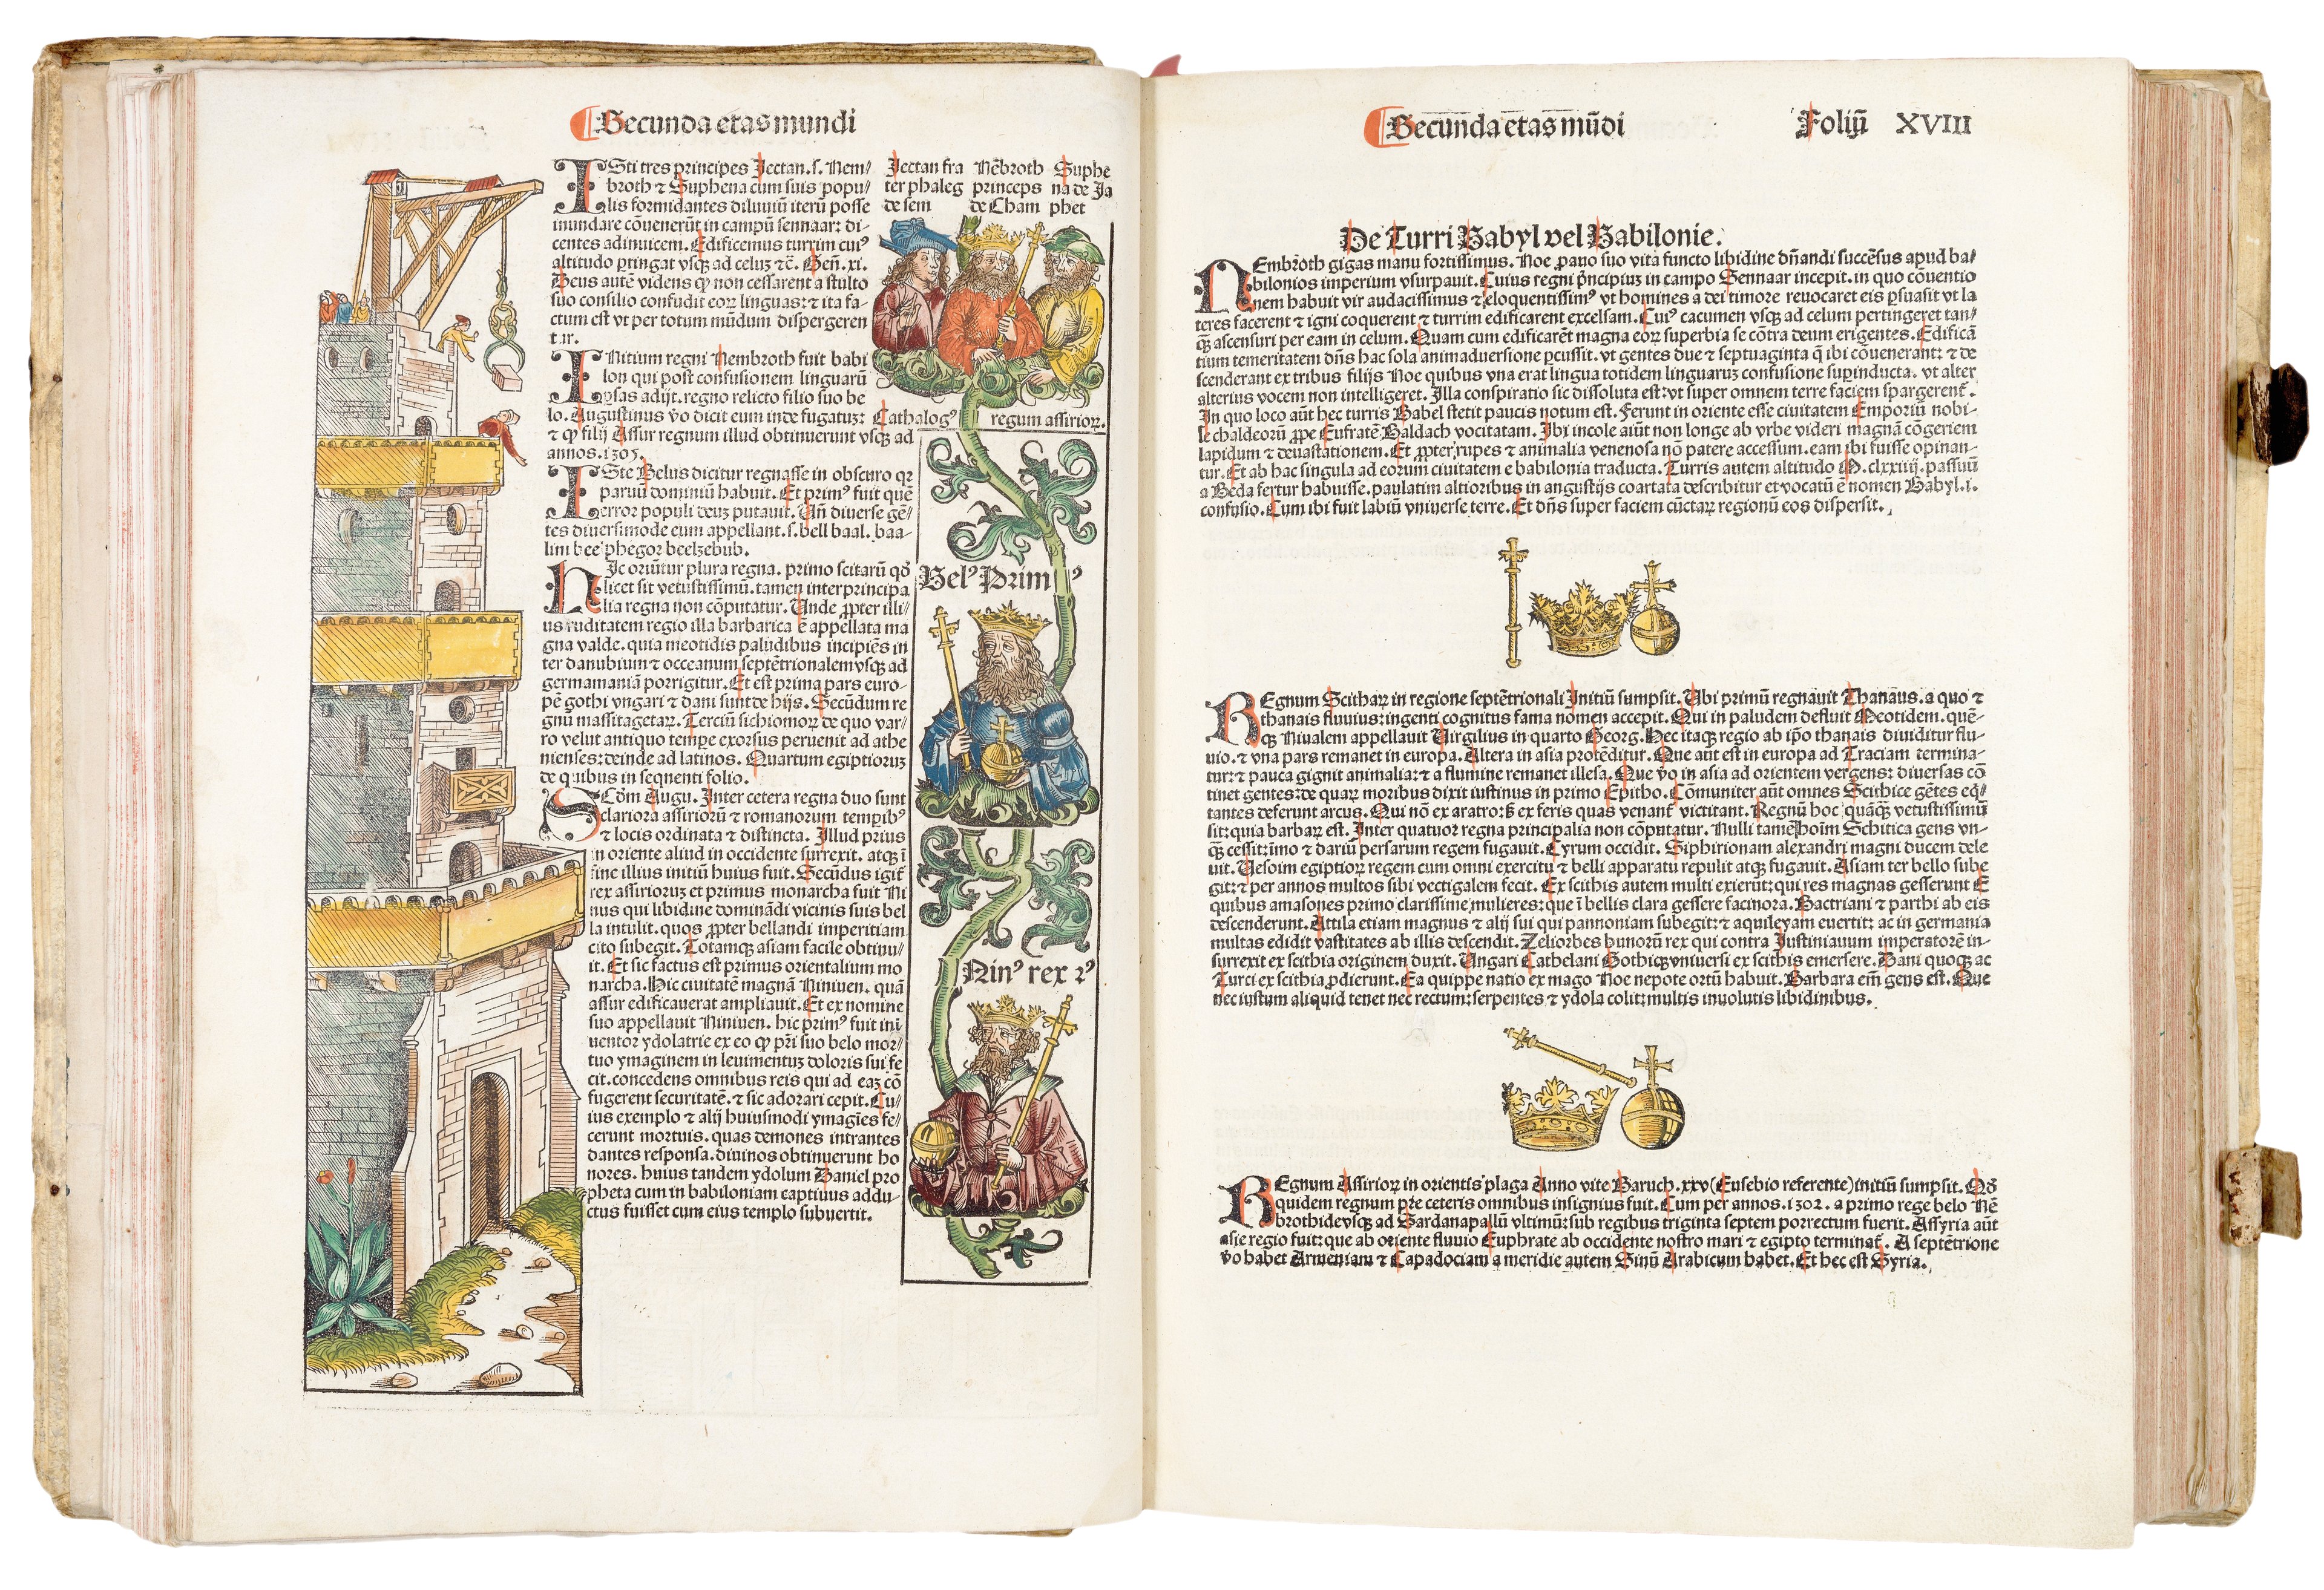 Excerpt from a chronicle: on the lefthand side, there is a drawing of a castle, with text and drawings of five people are opposite. On the right hand side, there is text separated by illustrations of crowns and sceptre.